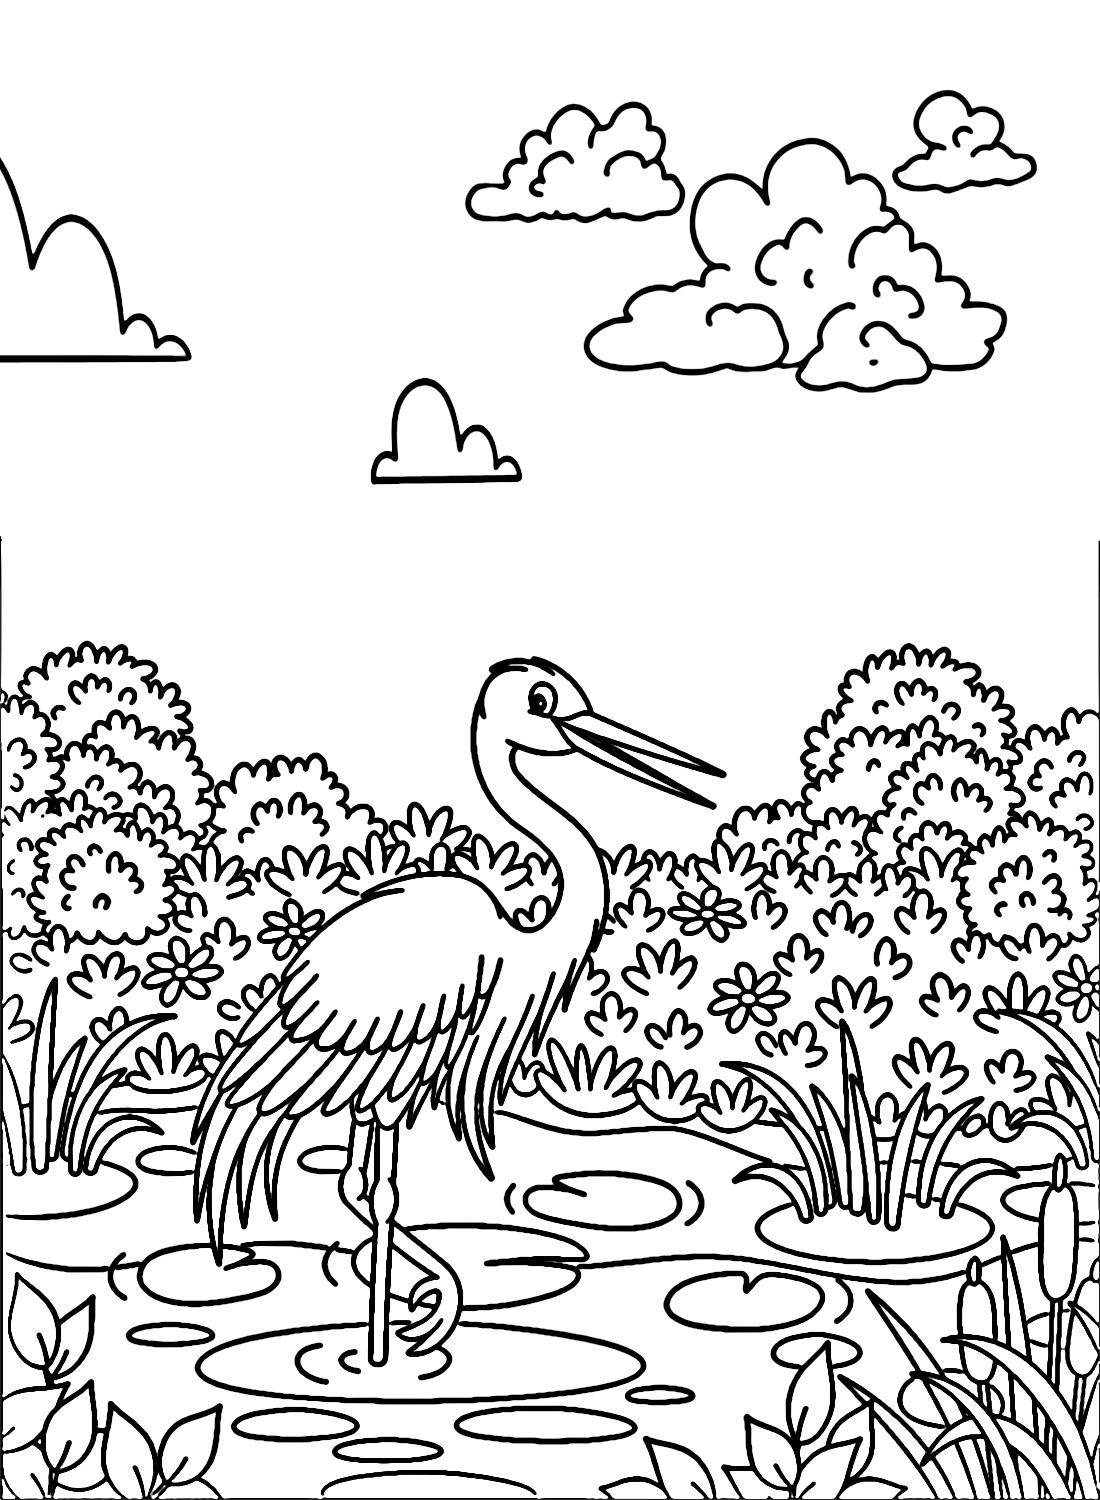 Herons Foraging in Swamps Coloring Page - Free Printable Coloring Pages